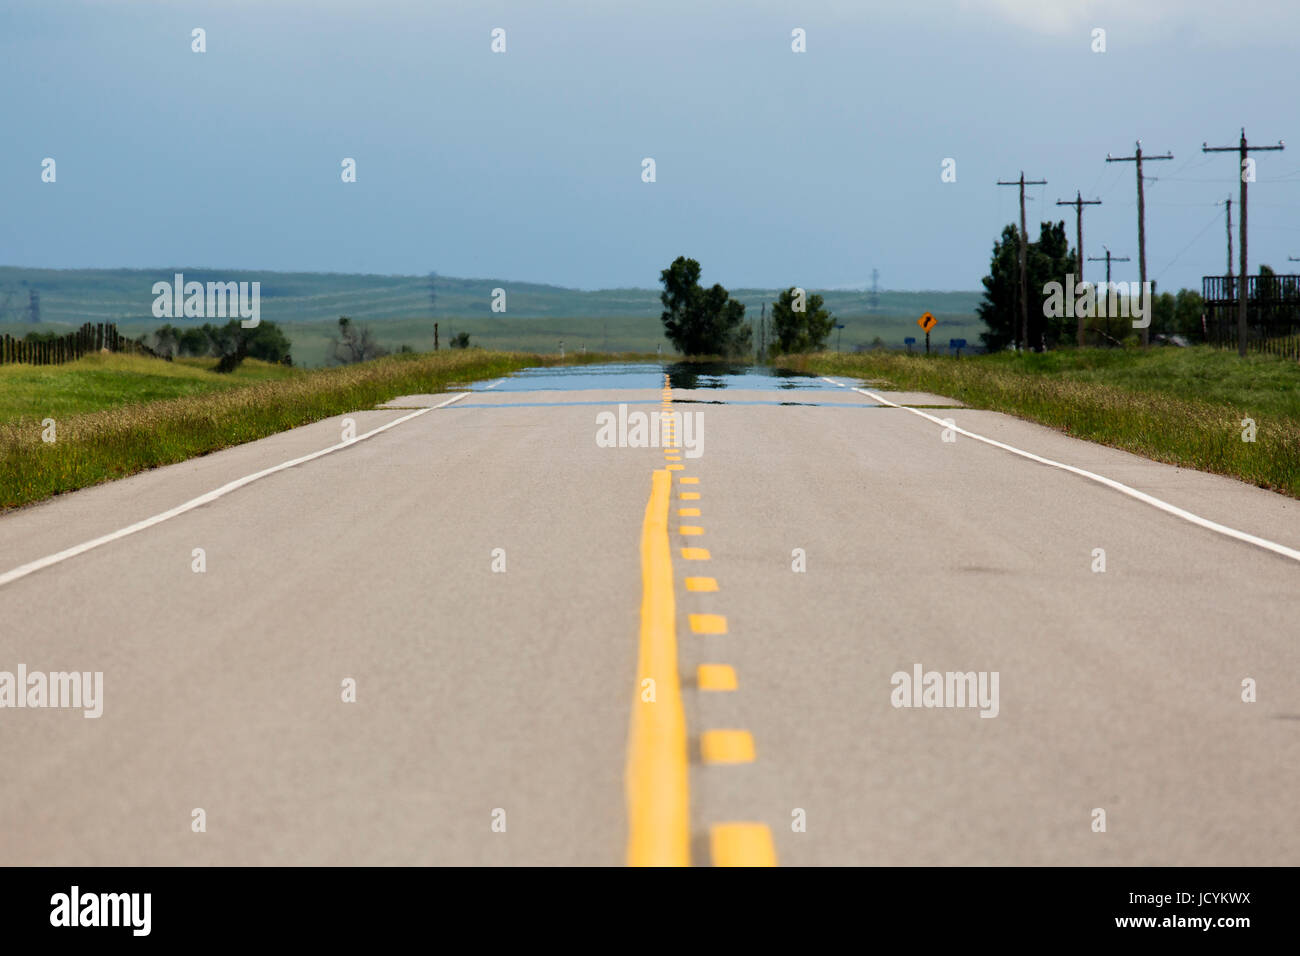 Empty road in Alberta, Canada. The tarmac on the highway has yellow lane markings. Stock Photo